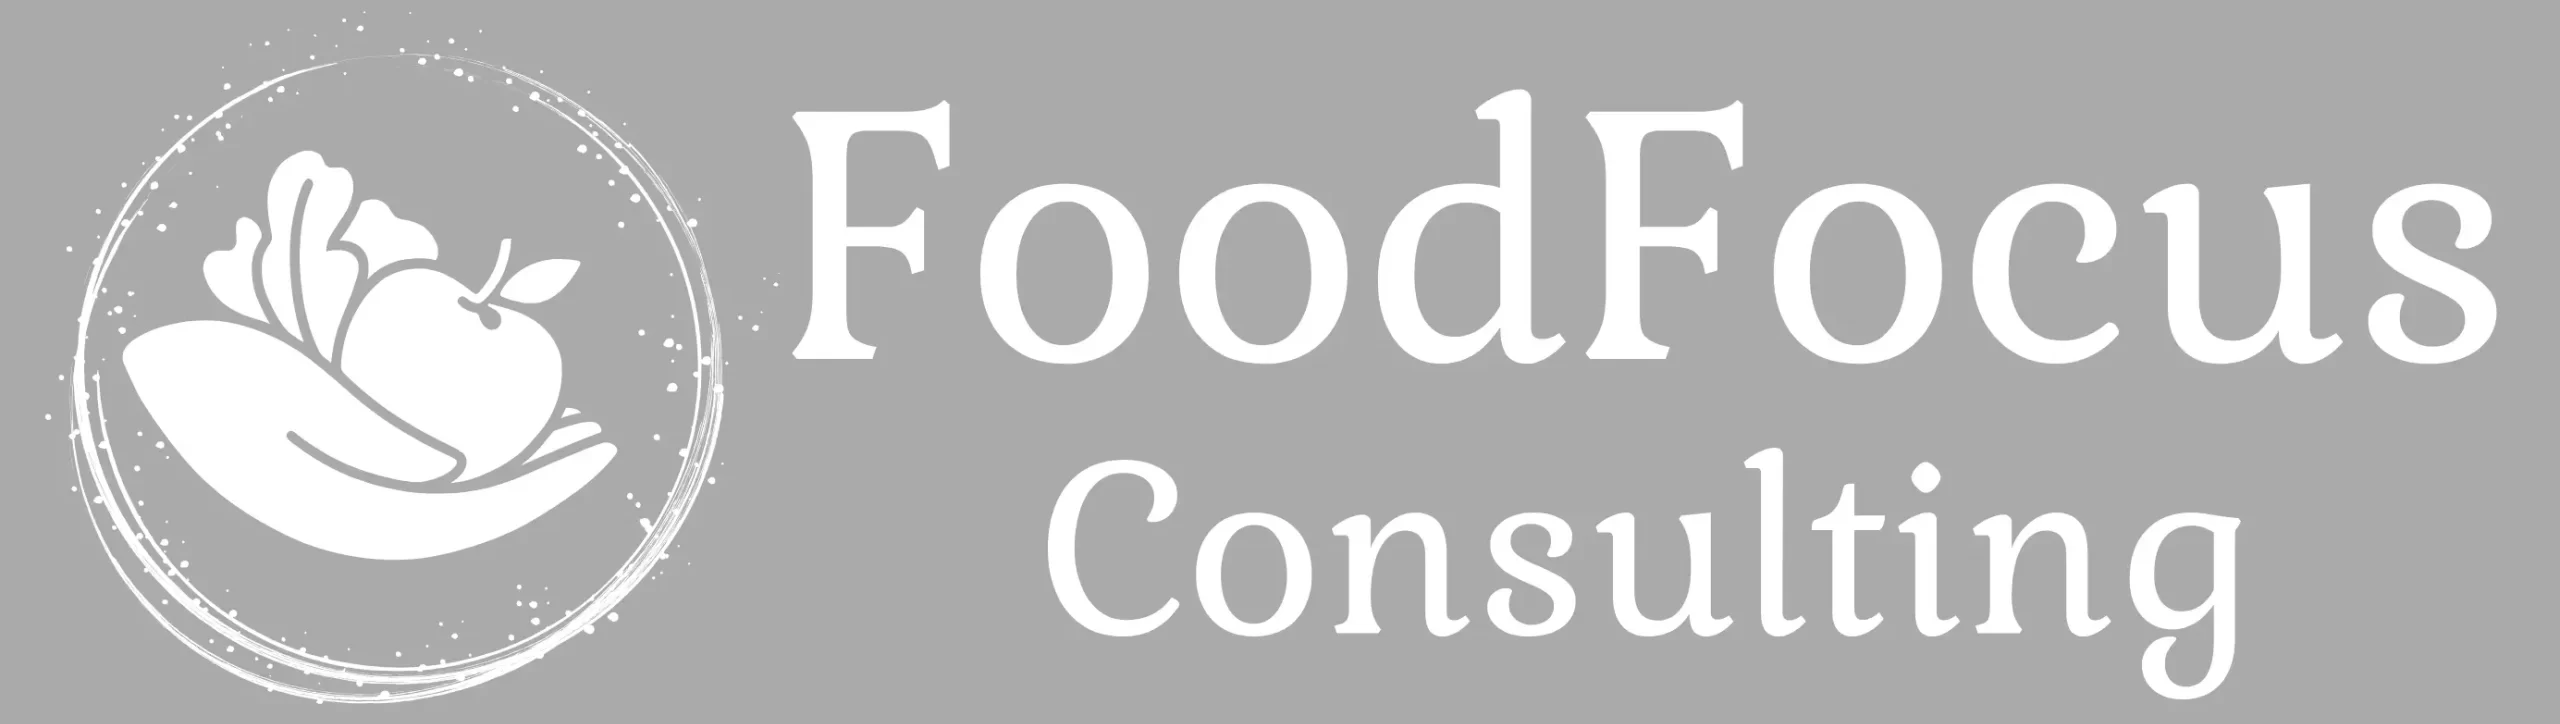 FoodFocus Consulting